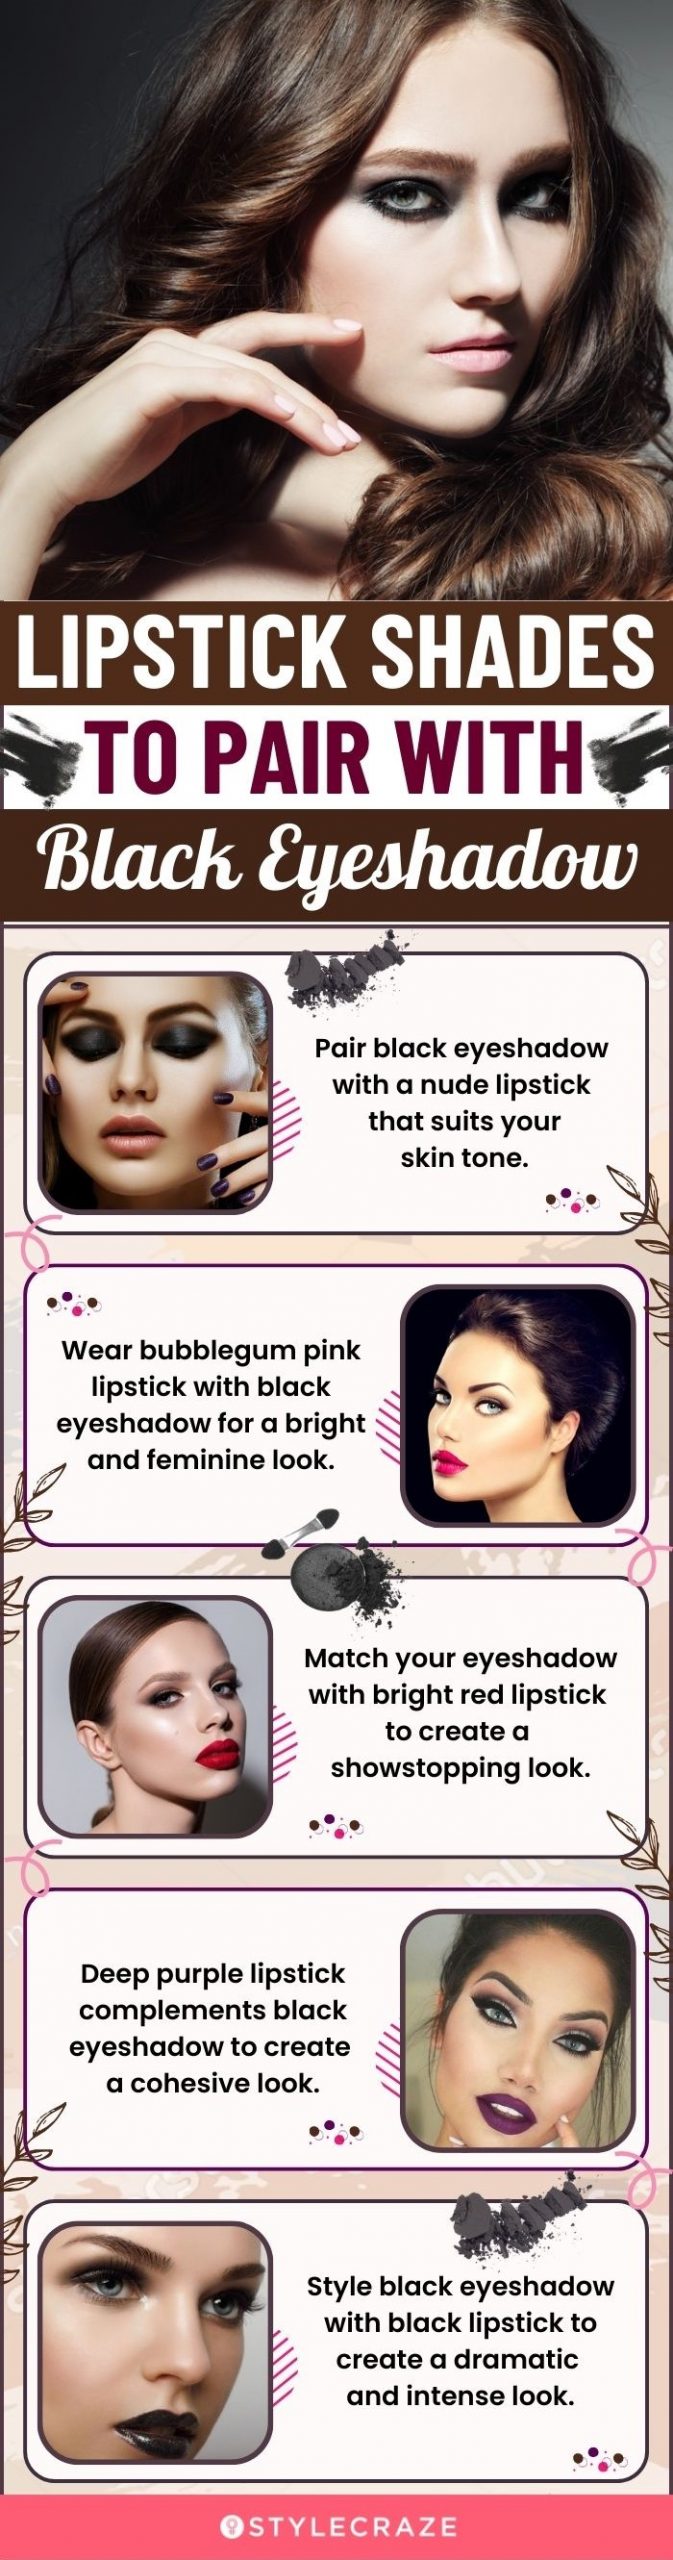 Lipstick Shades To Pair With Black Eyeshadow (infographic)